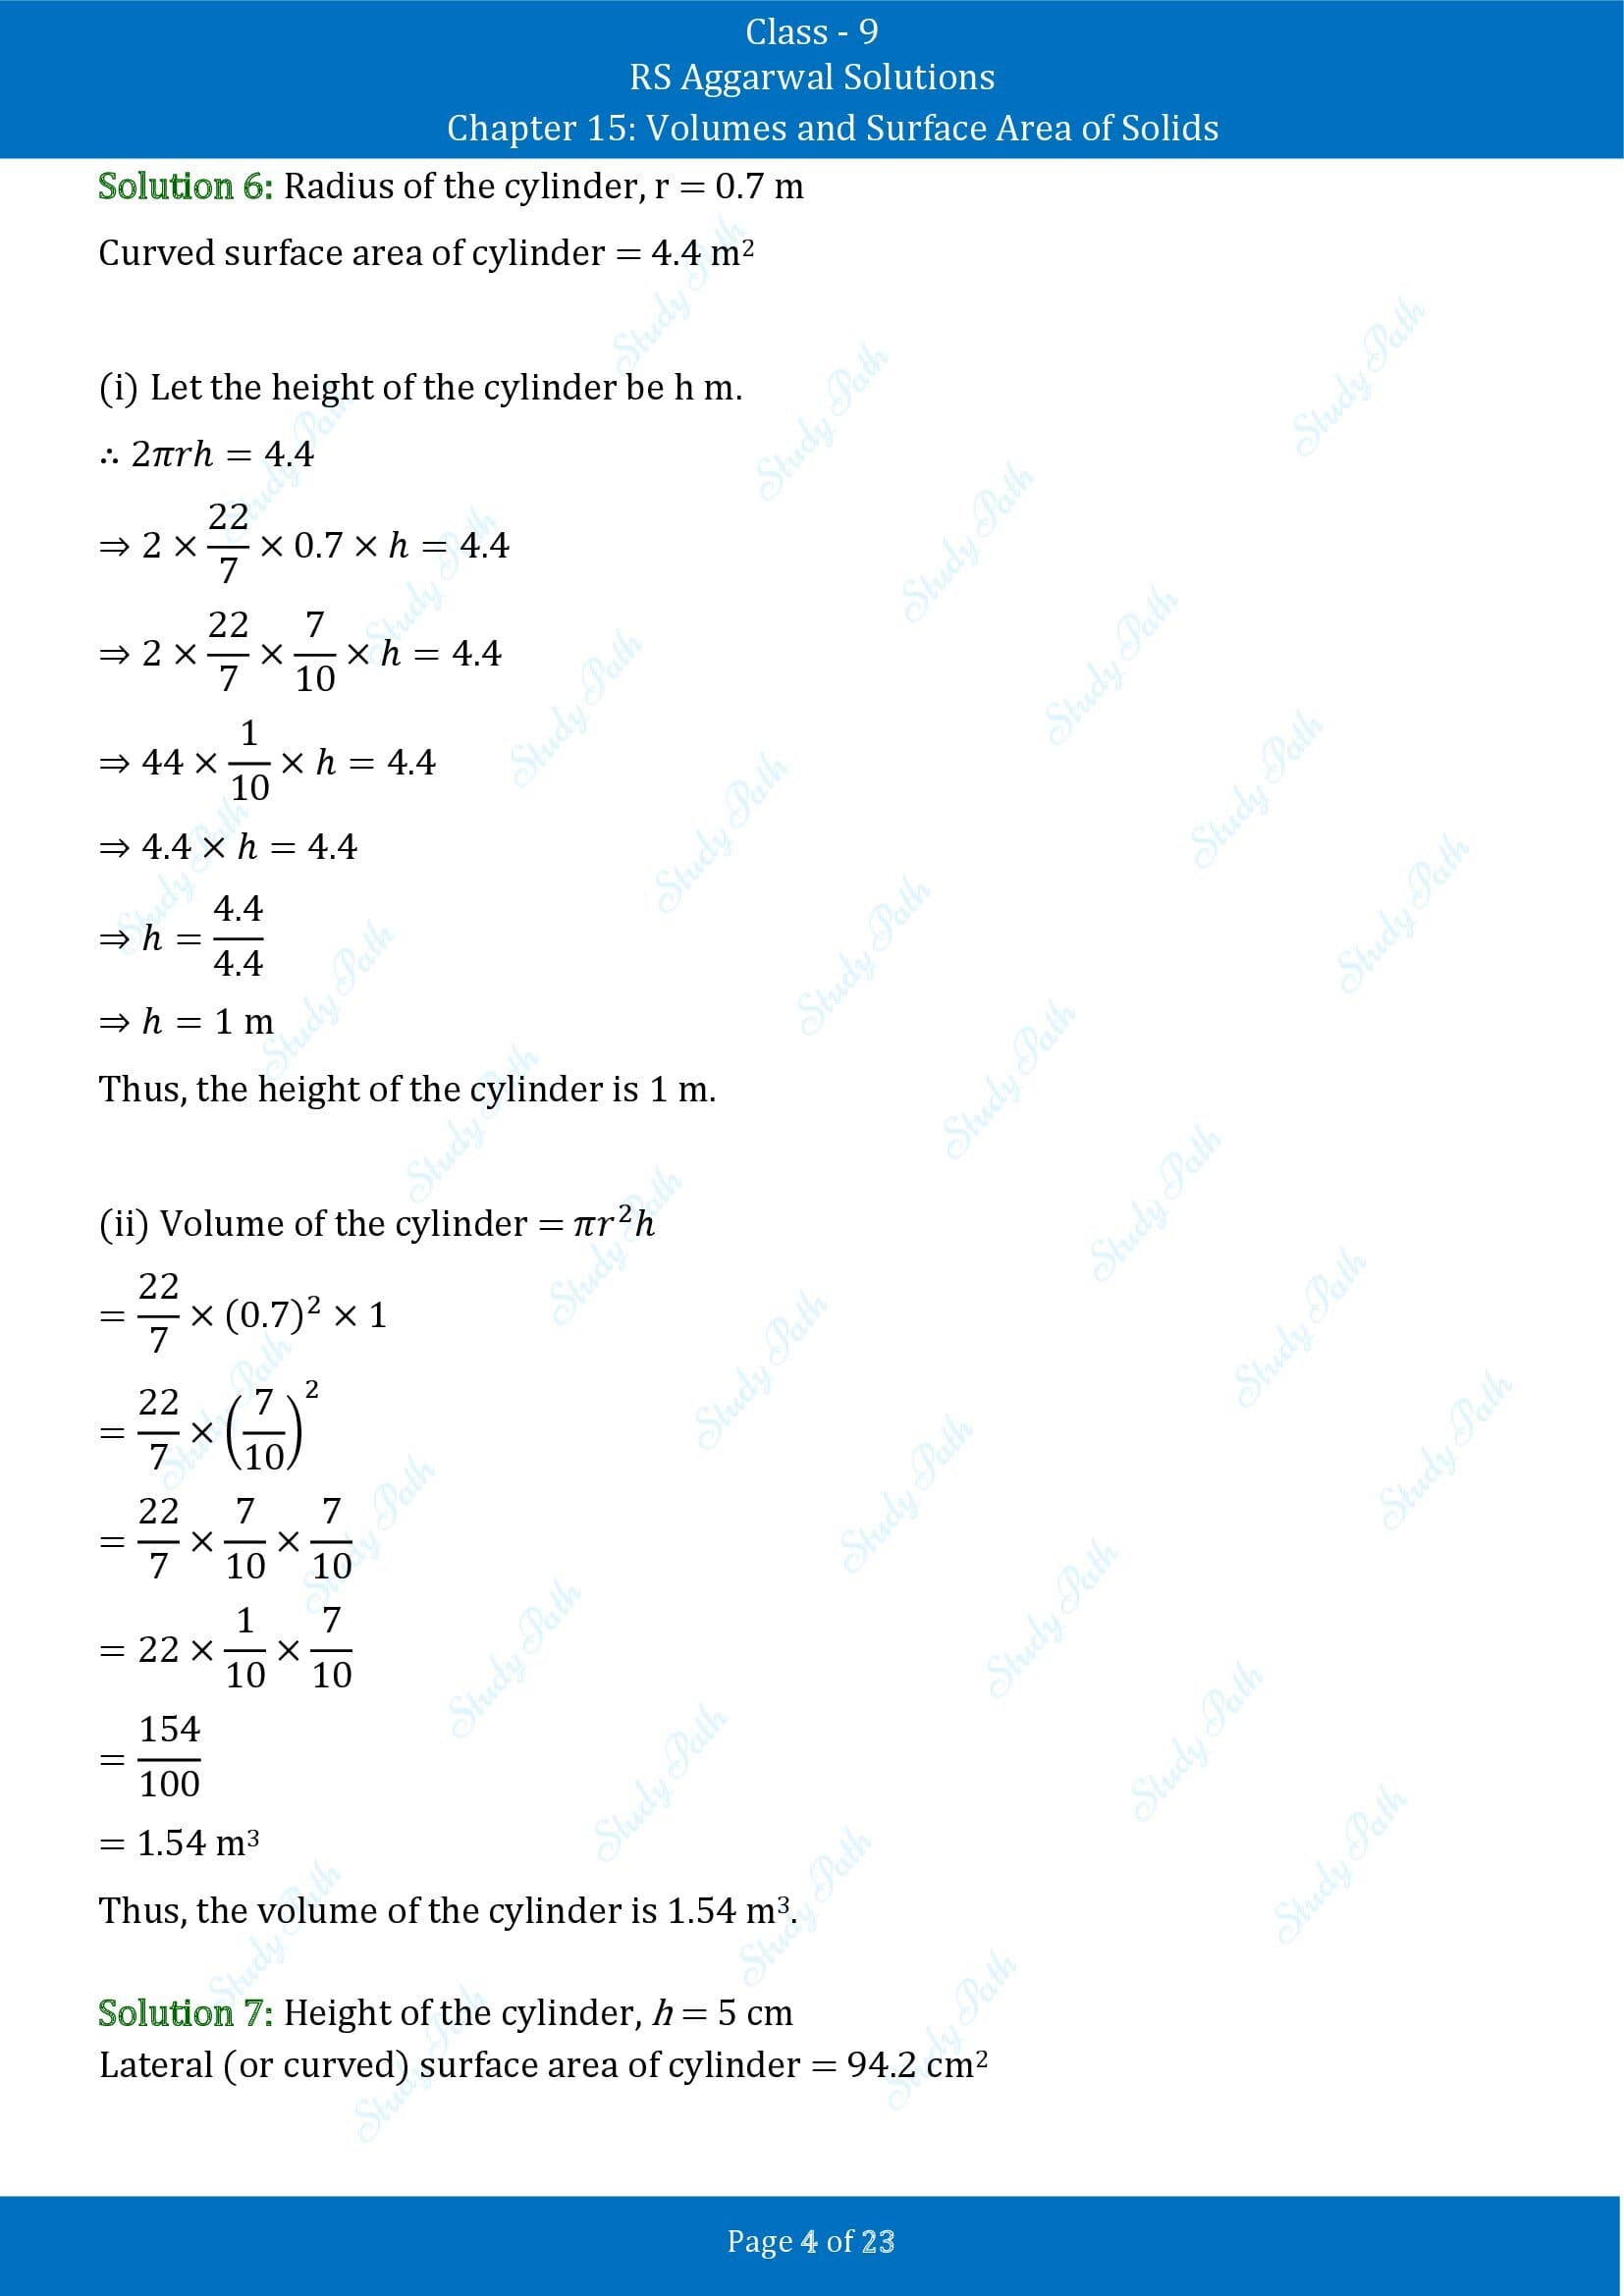 RS Aggarwal Solutions Class 9 Chapter 15 Volumes and Surface Area of Solids Exercise 15B 00004